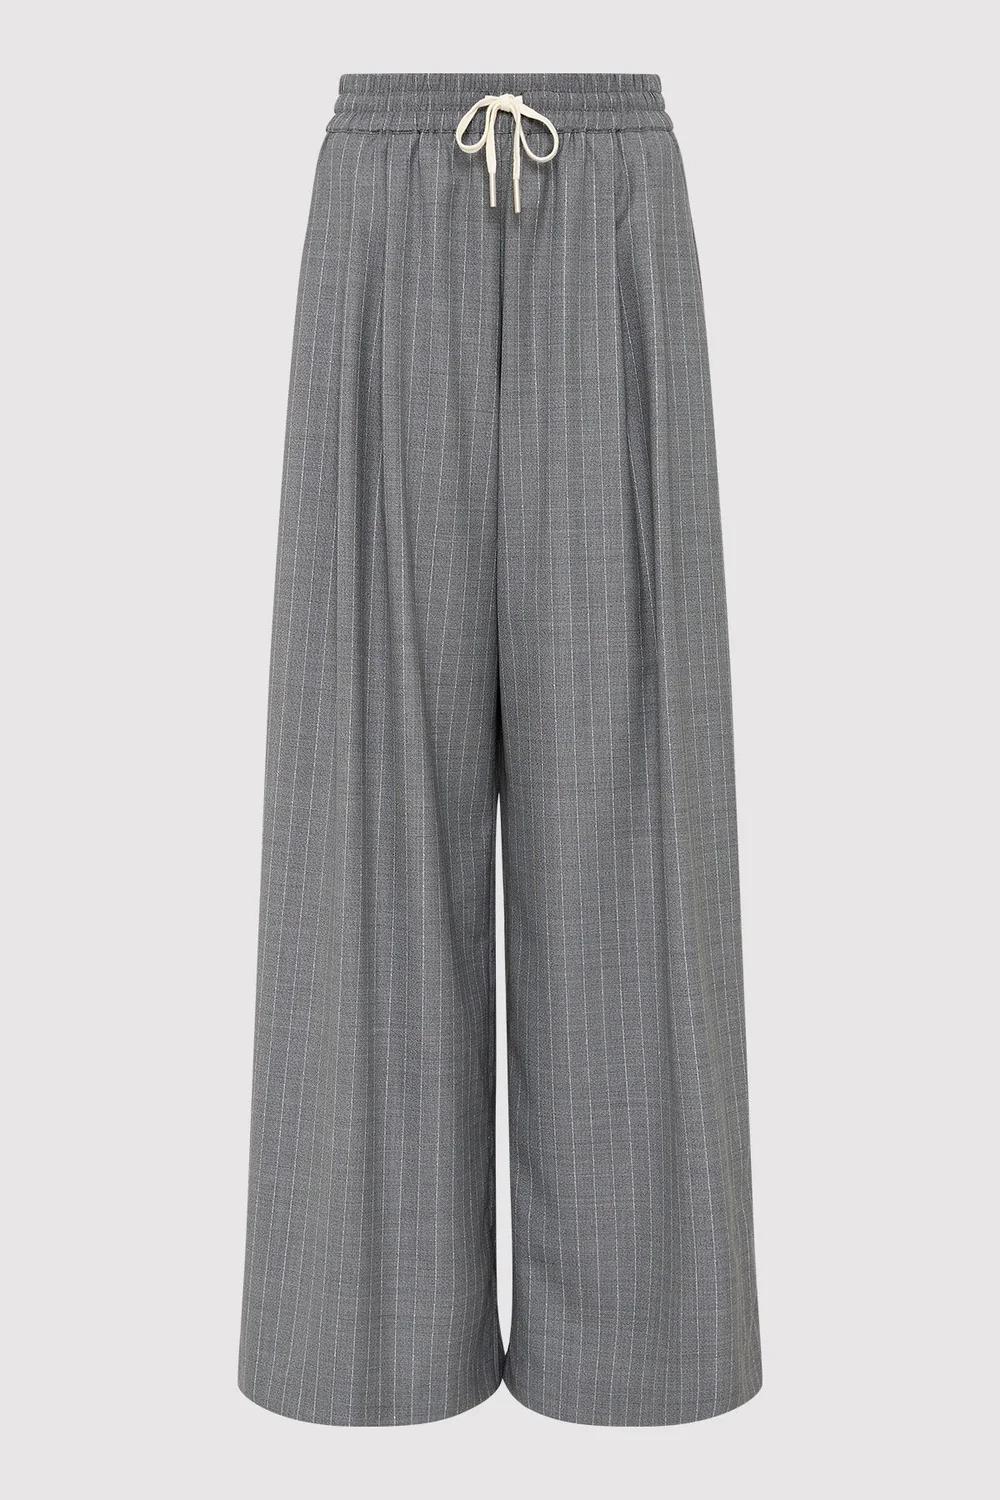 Product Image for Drawstring Relaxed Pants, Chalk Stripe